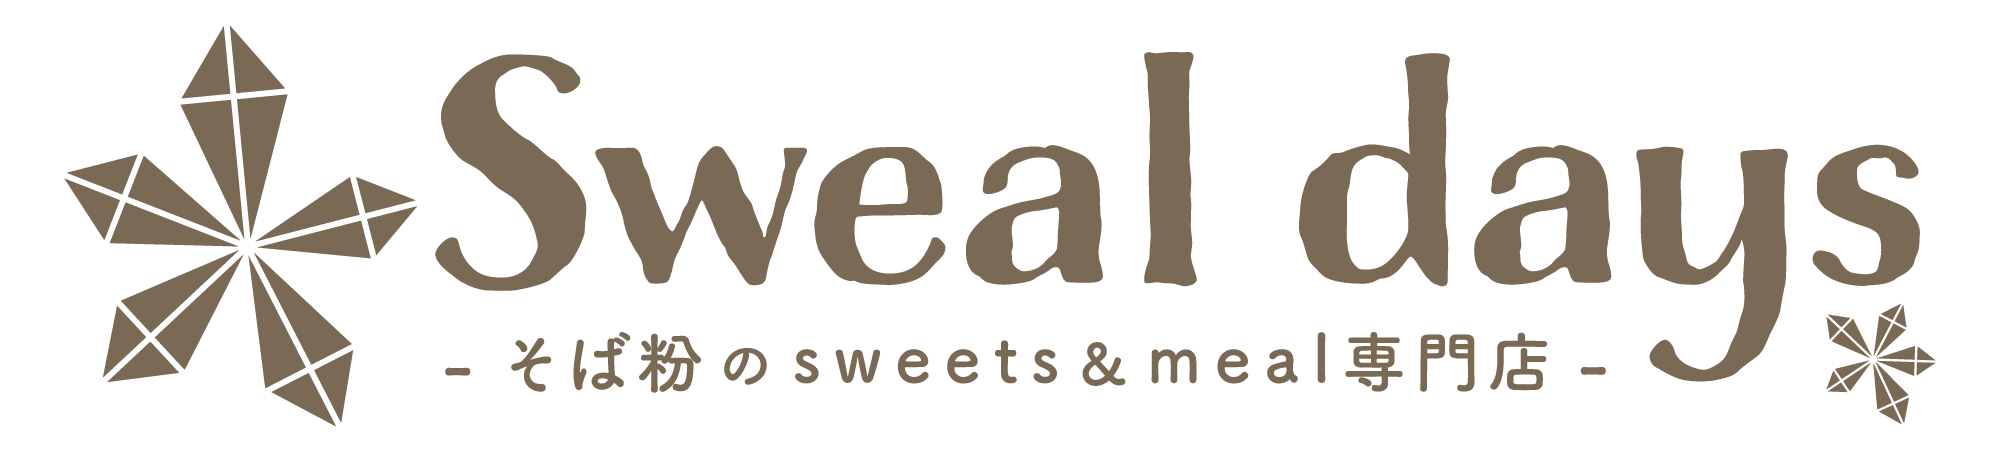 Sweal days - そば粉の sweets＆ meal 専門店 -